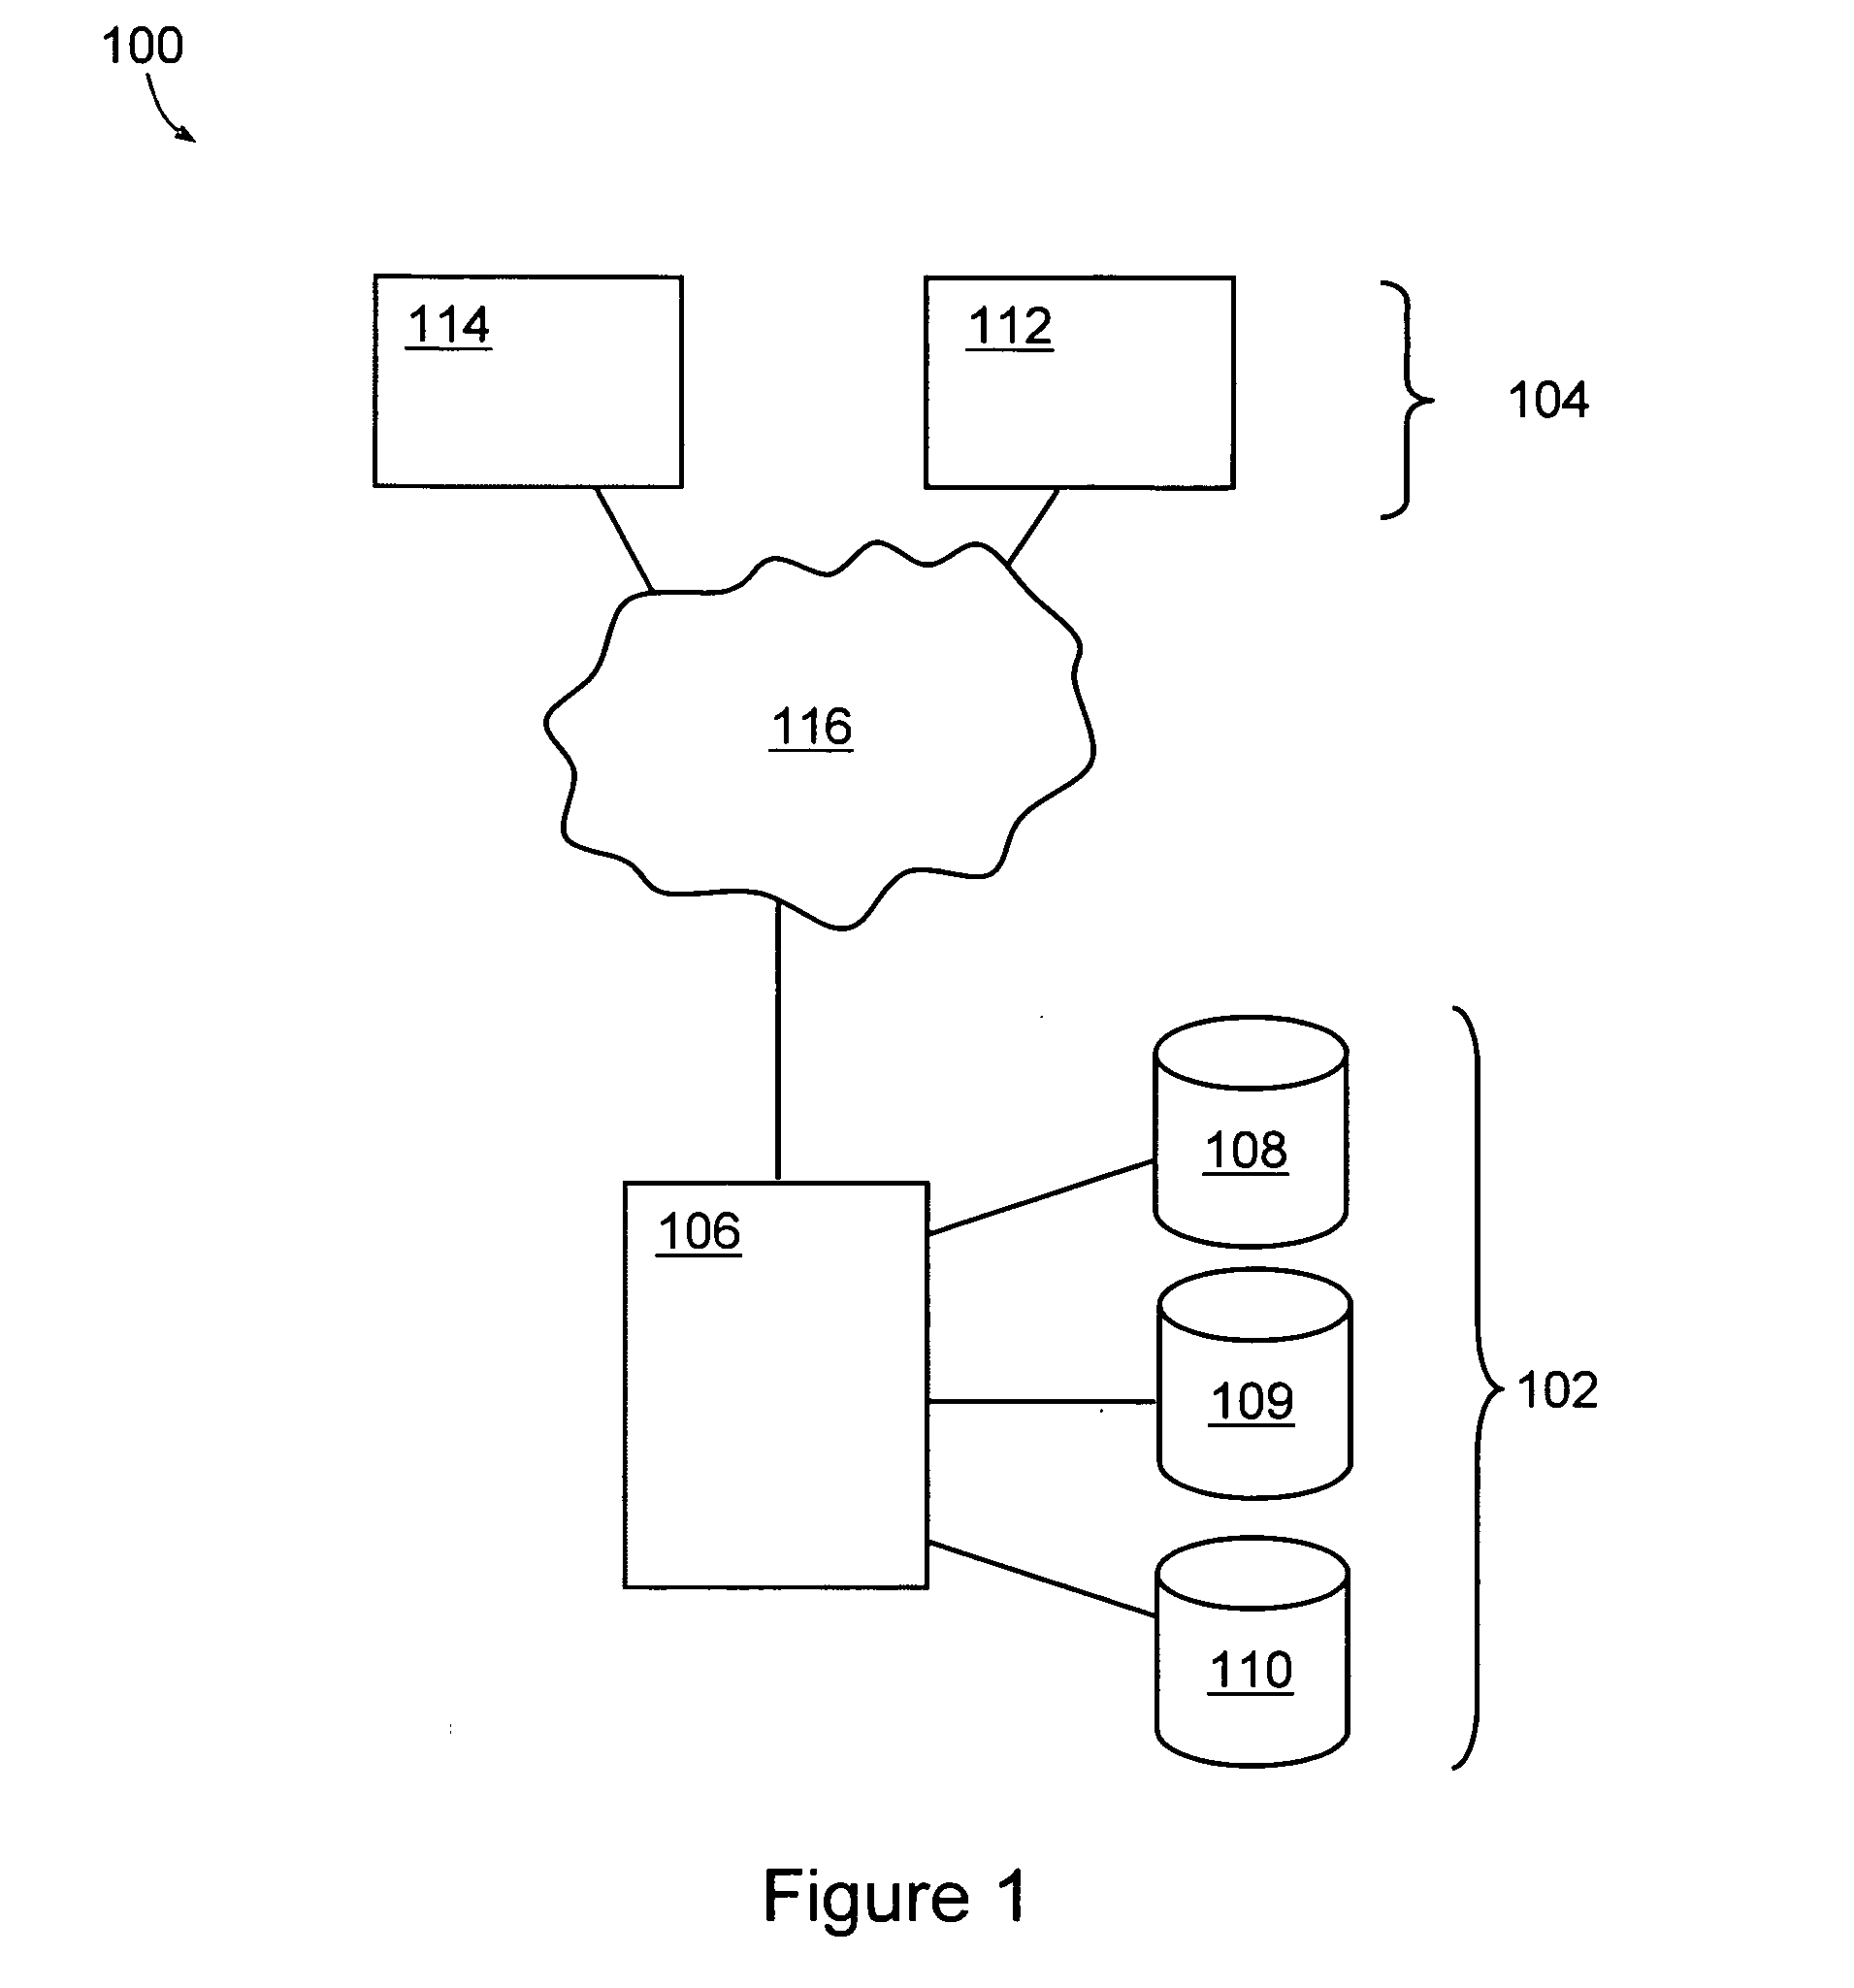 Method and system for identifying potential adverse network conditions